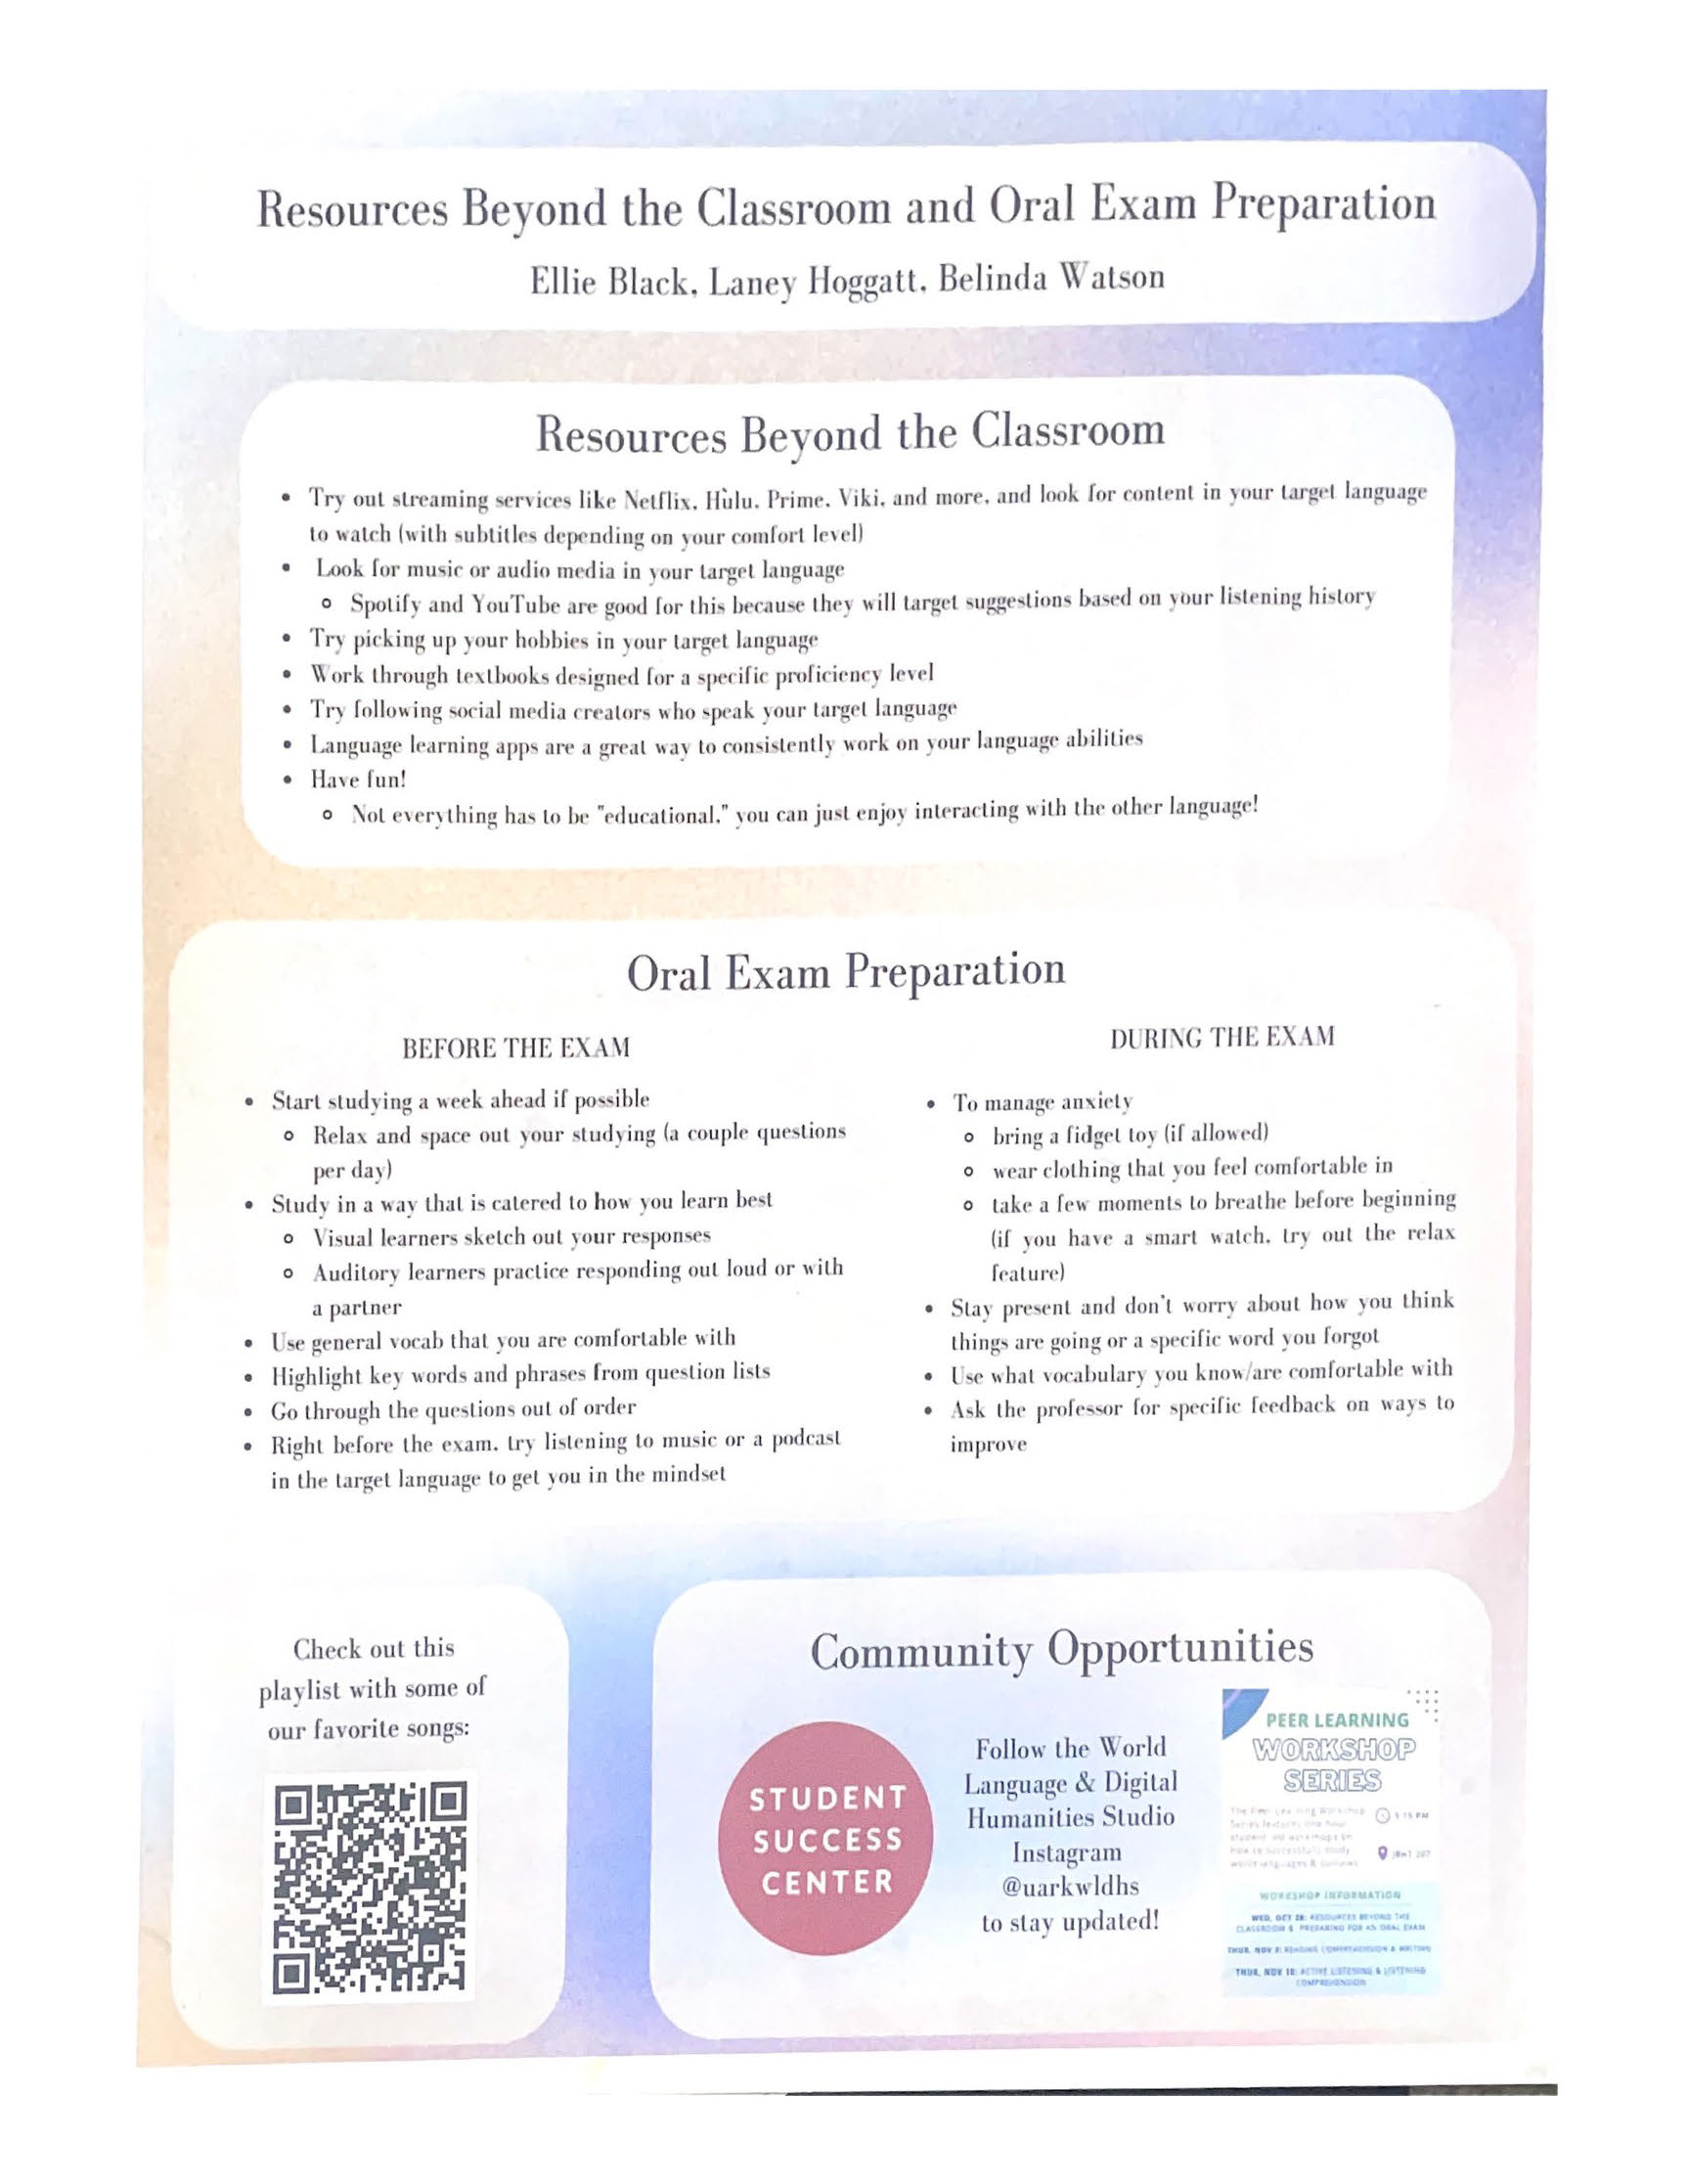 Reasources Beyond the Classroom and Oral Exam Preparation Handout